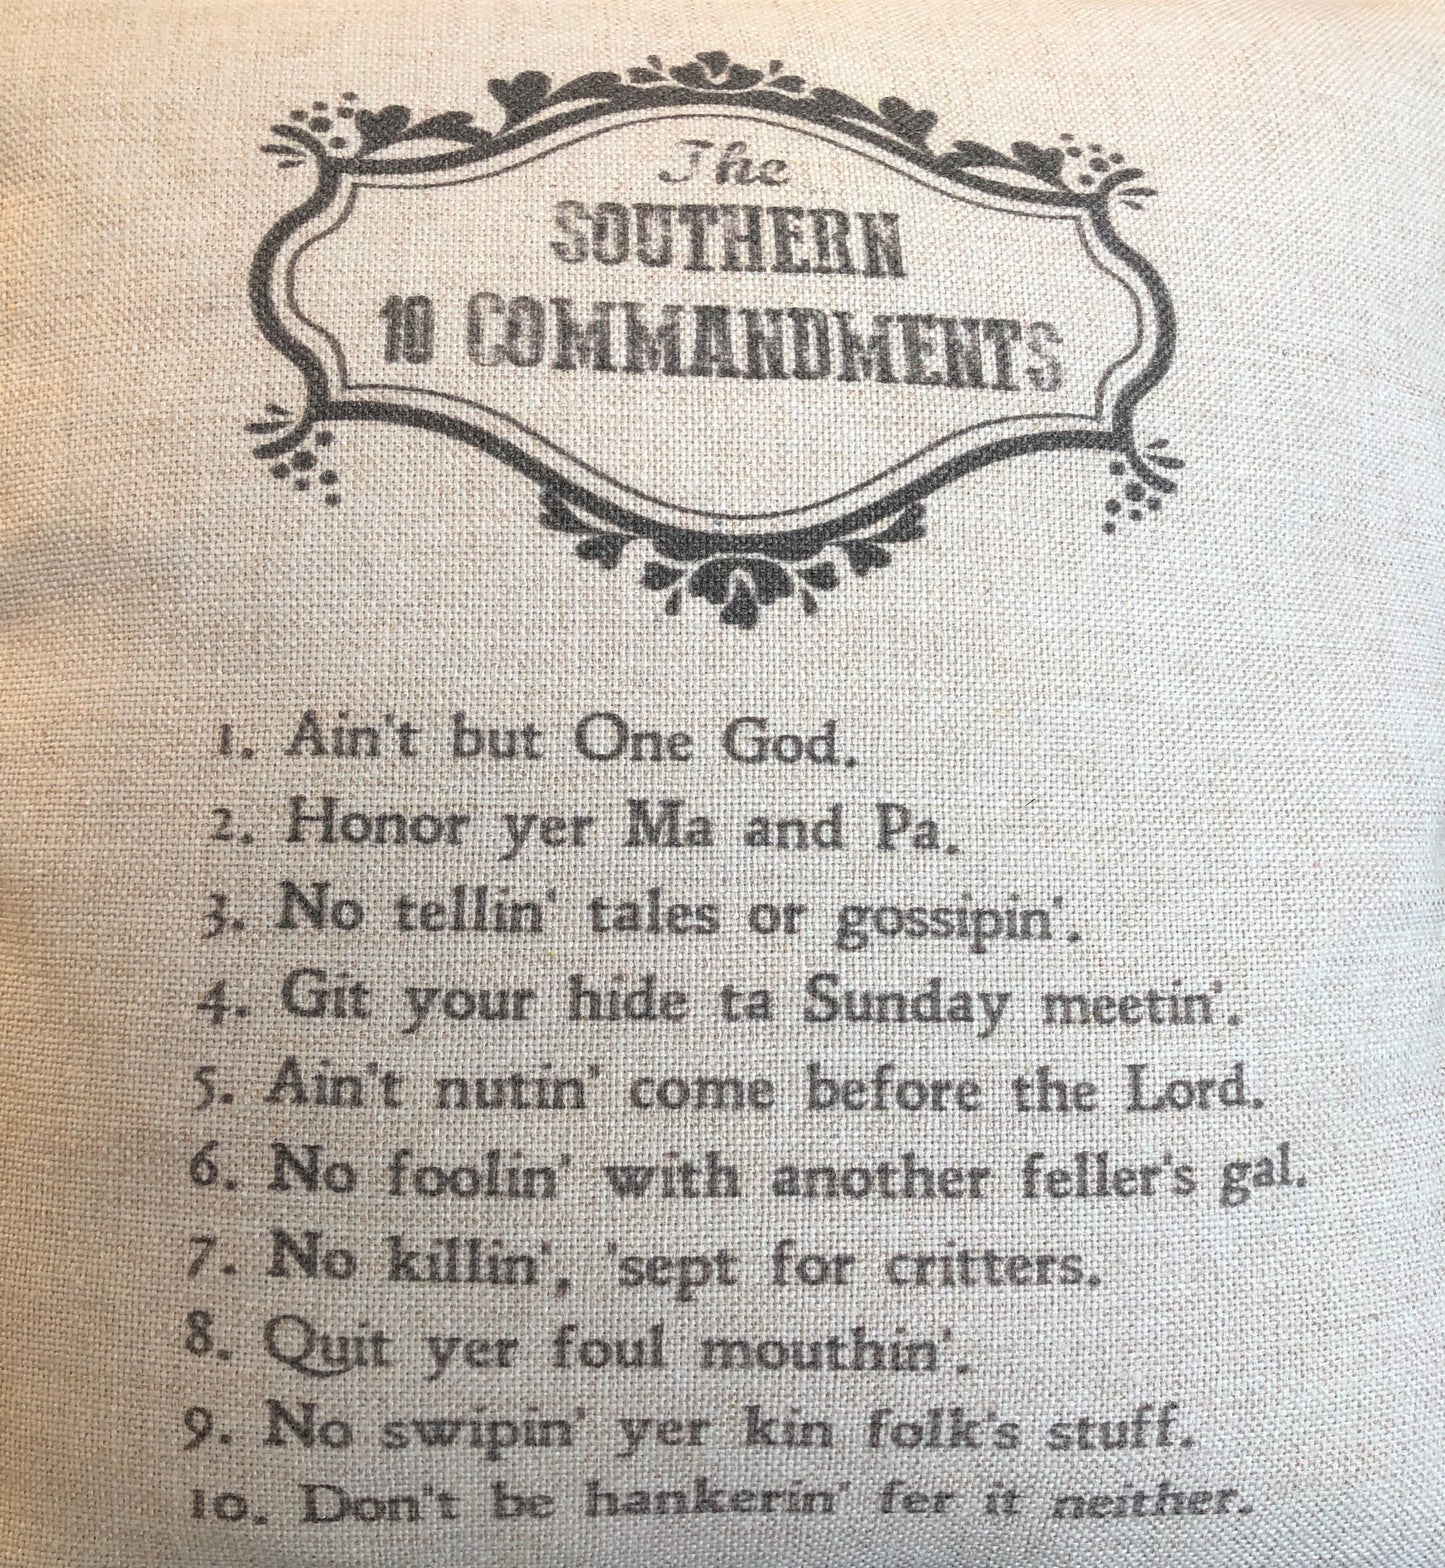 The Southern 10 Commandments Pillow